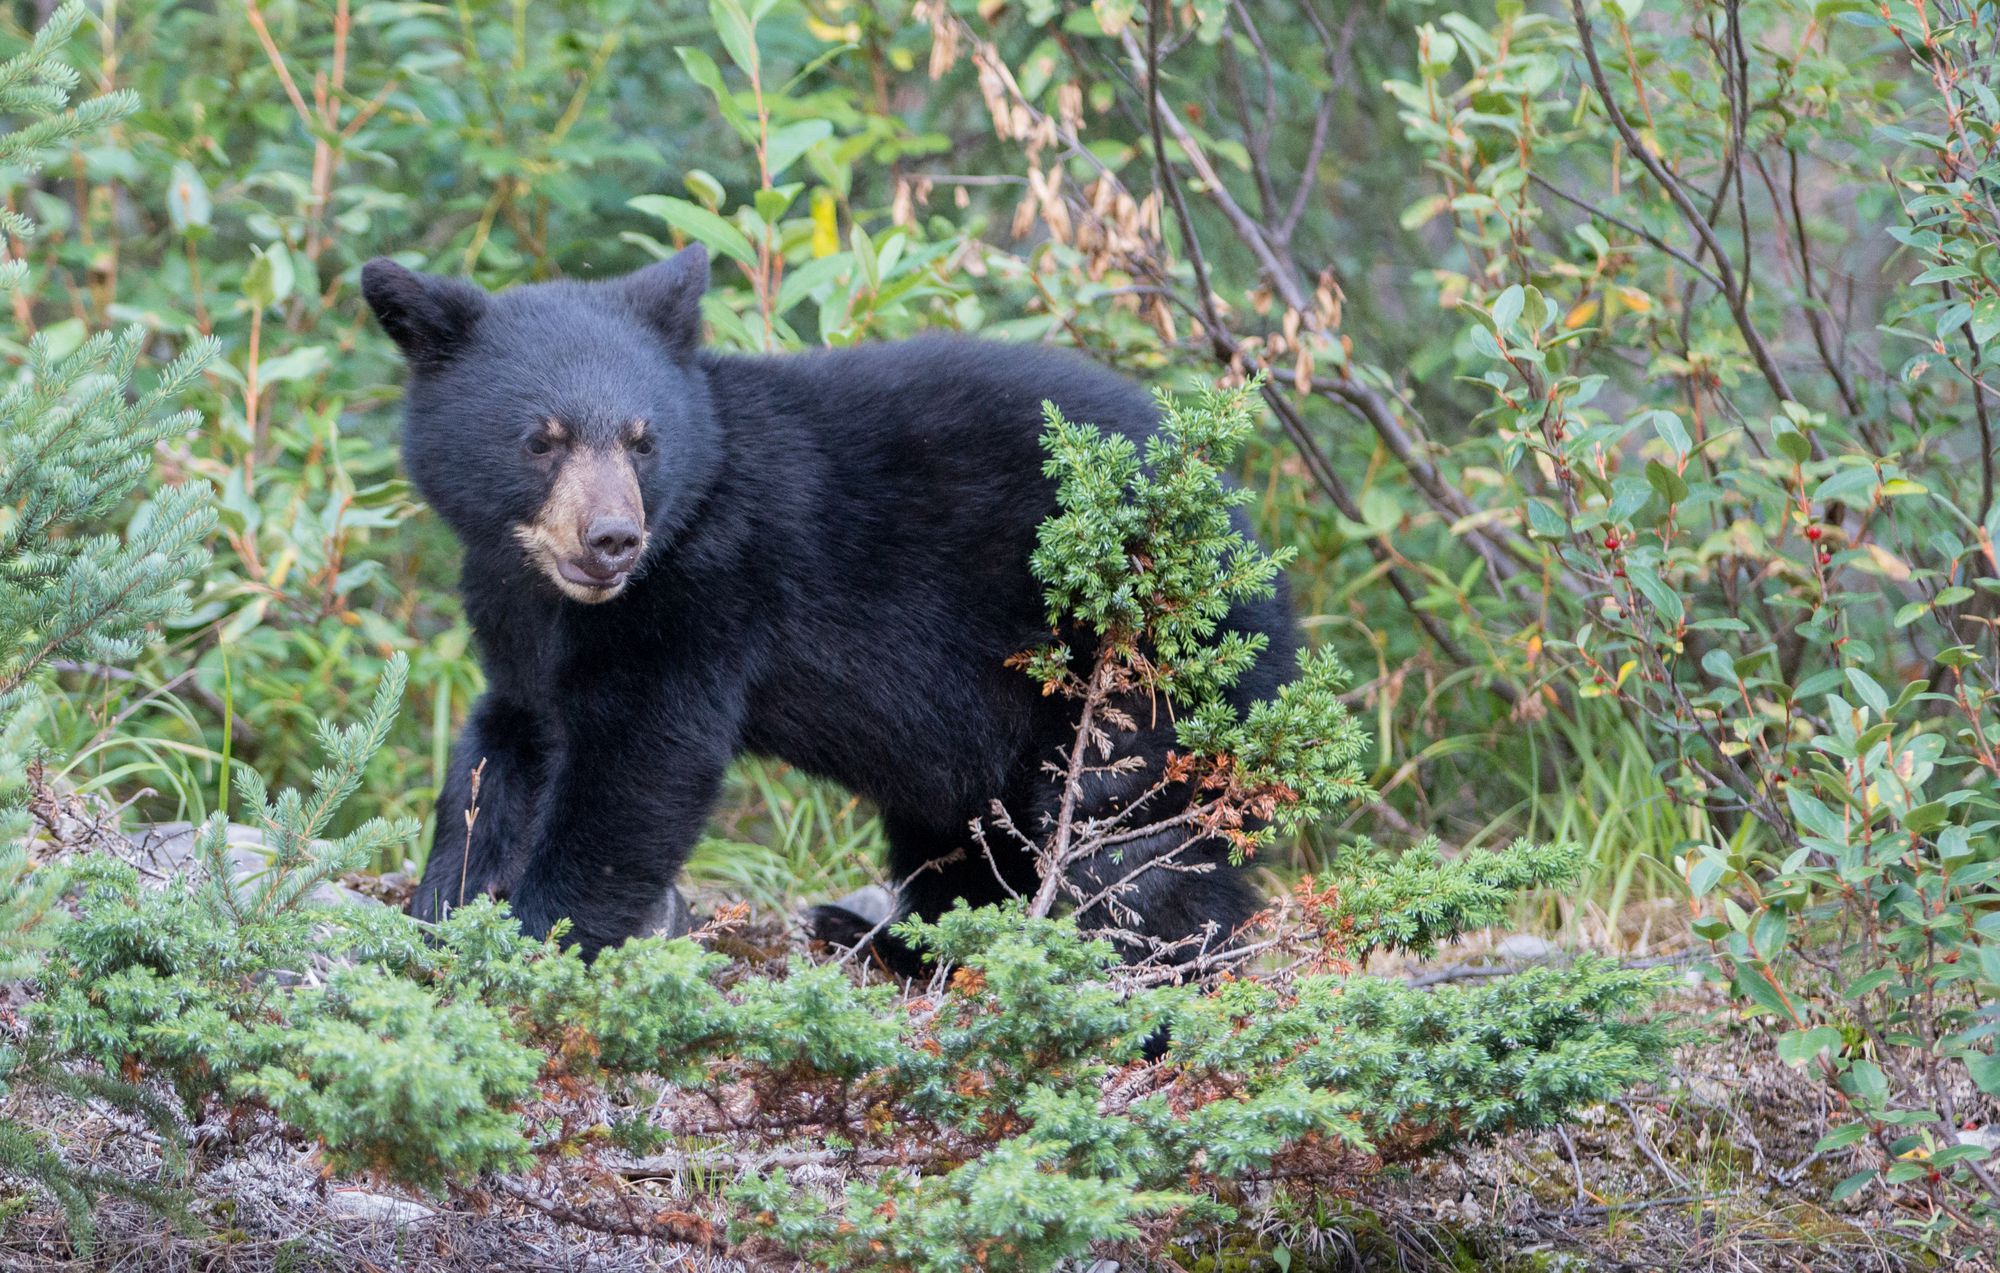 <p><b>Fatal attacks since the 1970s:</b> 54</p><p>Black bears are the most common bear species in North America, with an estimated <a href="https://defenders.org/wildlife/black-bear">population of 300,000 to 400,000</a> in the United States. They are spread out across at least 40 states, with some of the largest populations in California, where there are about 30,000 to 40,000 bears; Pennsylvania, with around 20,000; Wisconsin, which has roughly 24,000; and North Carolina, with around 15,000. While fatal black bear attacks are extremely rare — especially ones predatory in nature — they do happen. The most recent fatal black bear attack in the United States occurred in June 2023 in Arizona, when a <a href="https://www.yahoo.com/lifestyle/black-bear-attacks-kills-man-181123212.html">66-year-old man from Tucson</a> was fatally mauled by a black bear while drinking coffee on his property in the Groom Creek area of Yavapai County.</p>